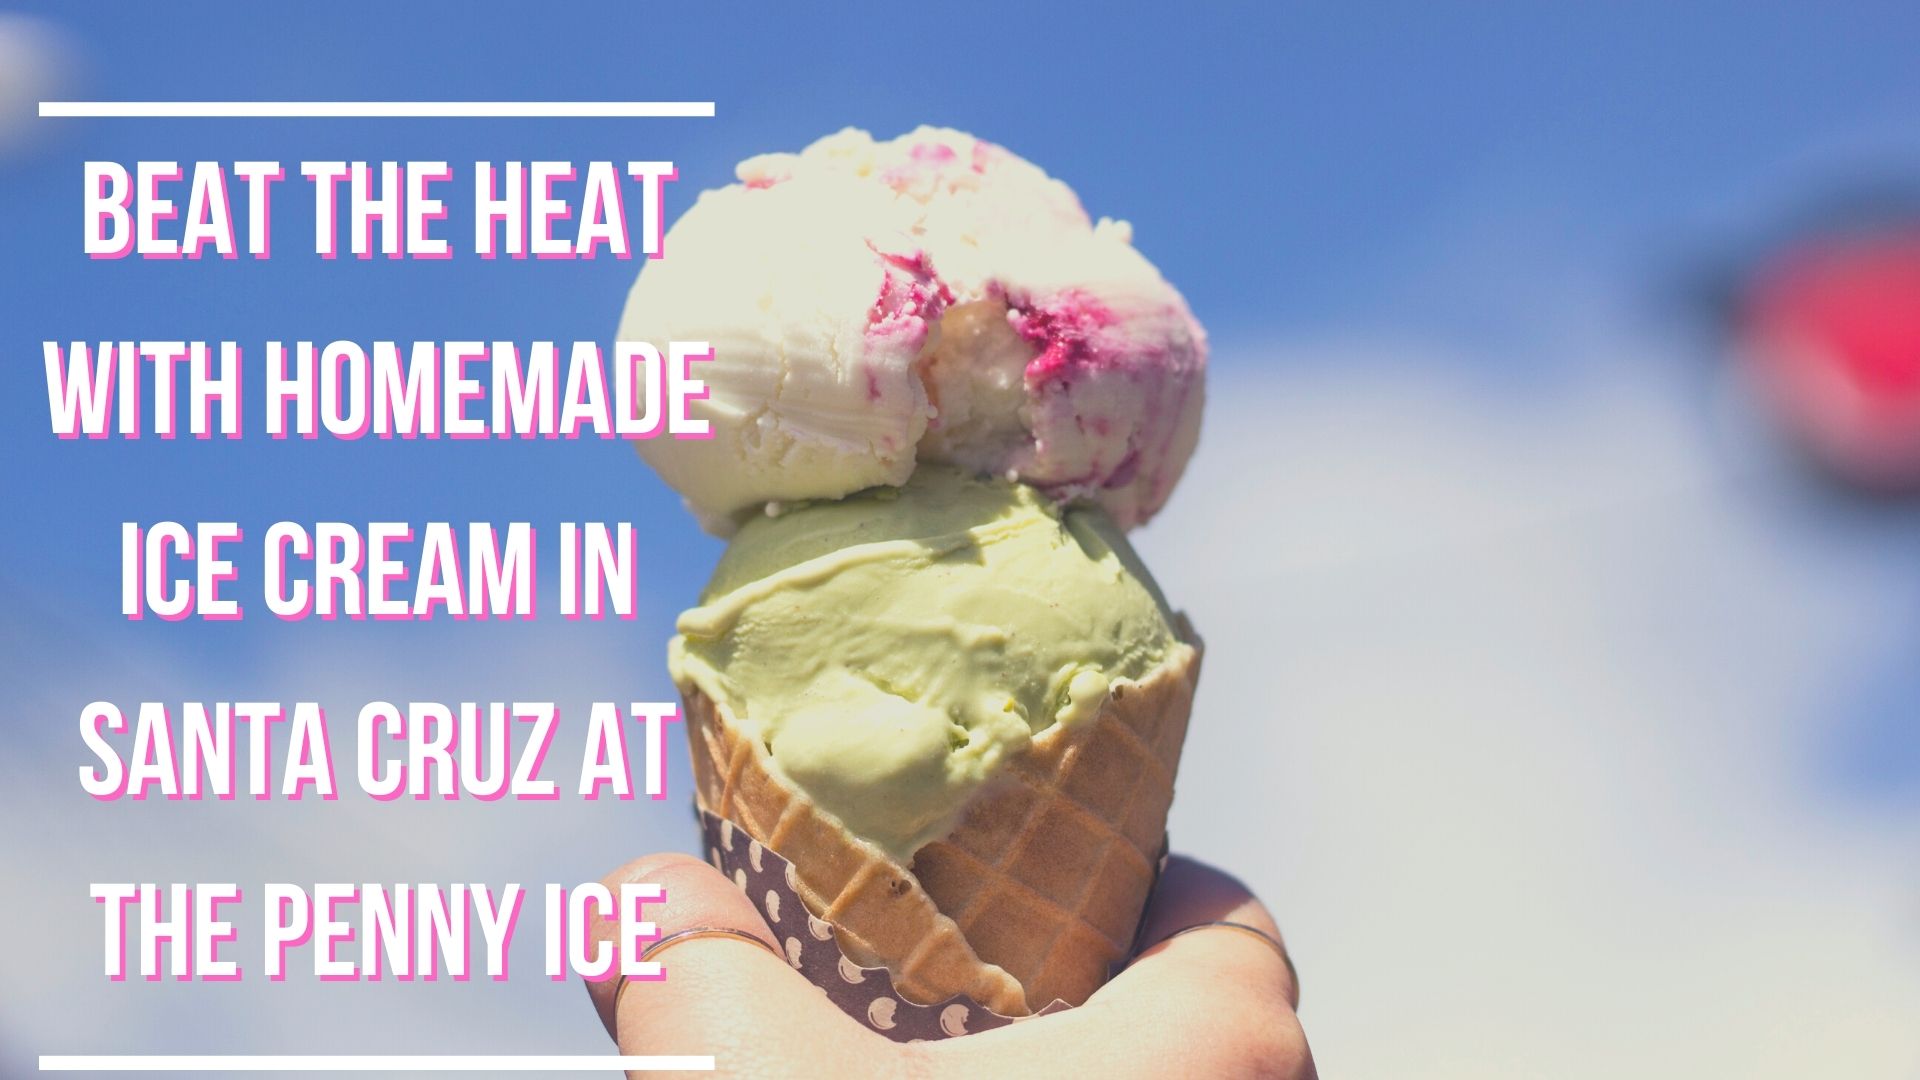 Beat the Heat with Homemade Ice Cream in Santa Cruz at the Penny Ice